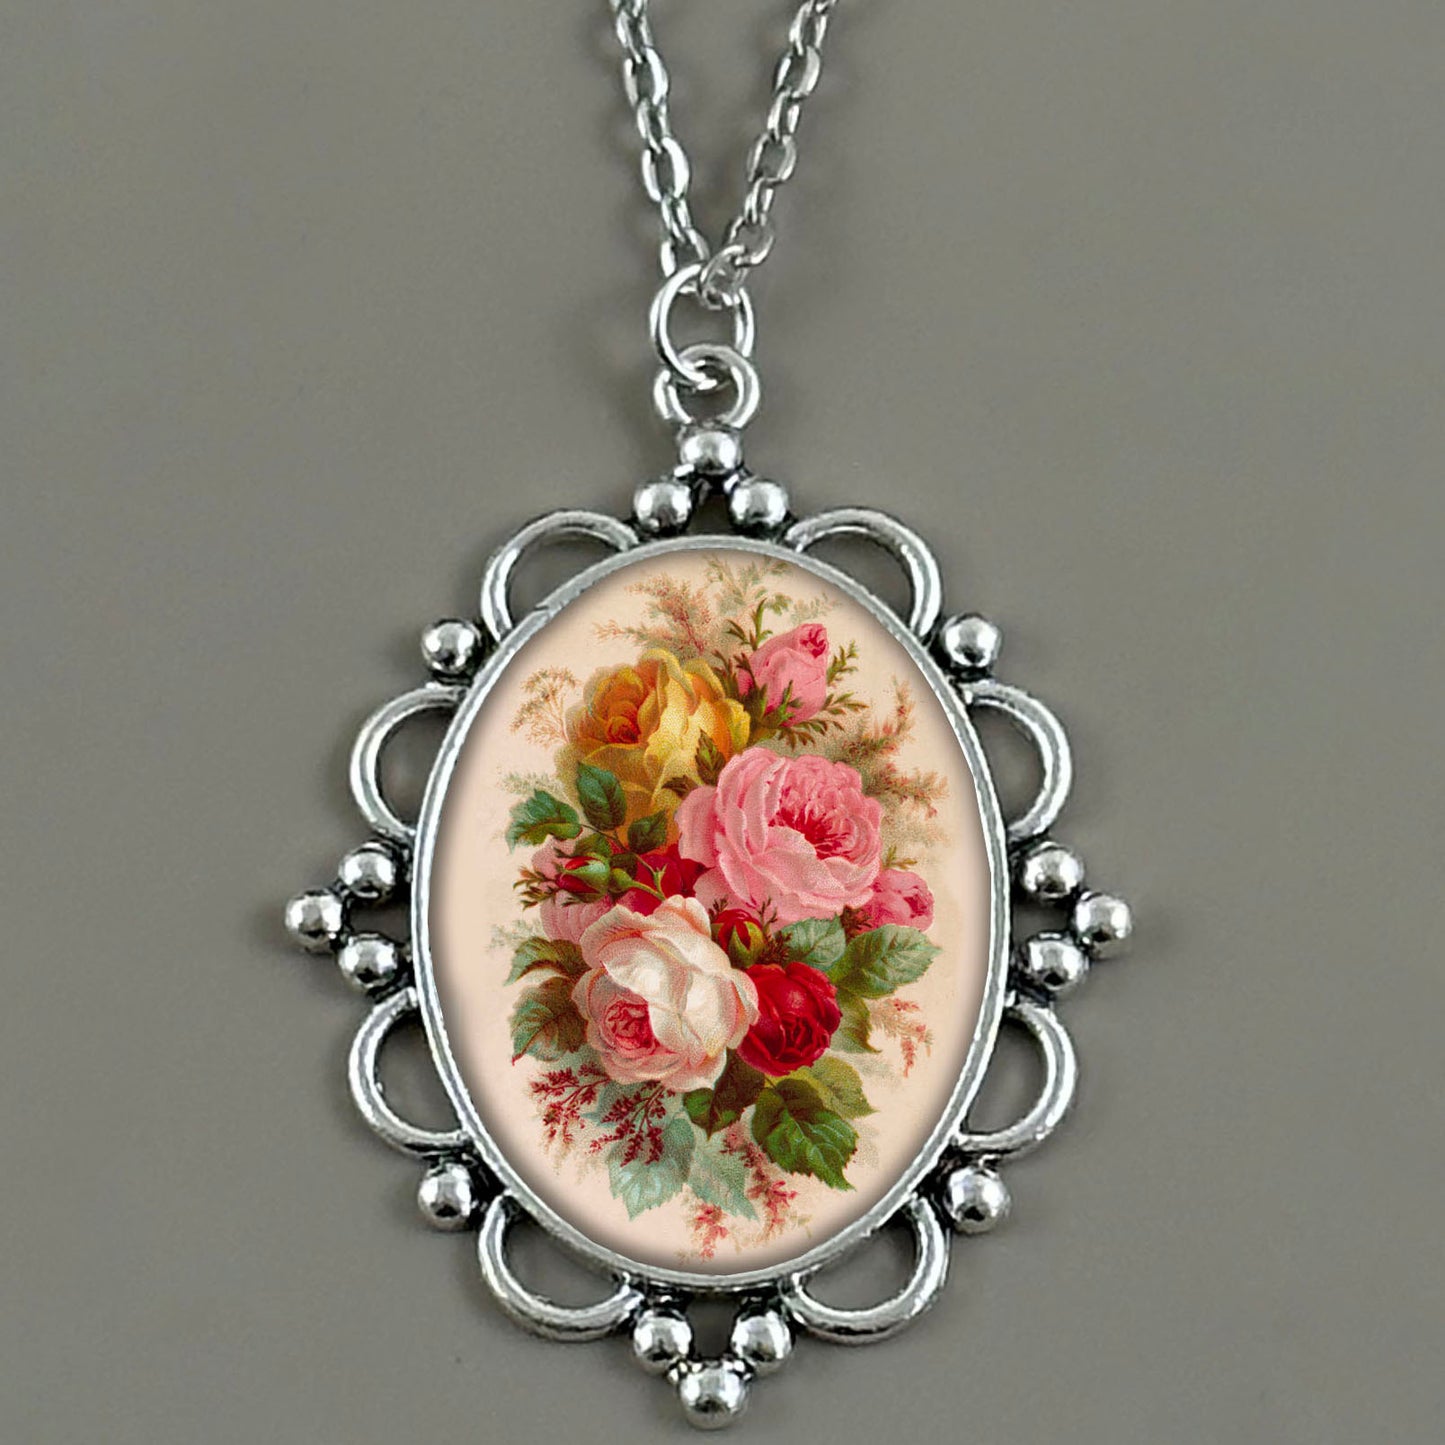 Make Your Own Photo Necklace Kit 40x30mm Beaded Flower Oval Antique Silver